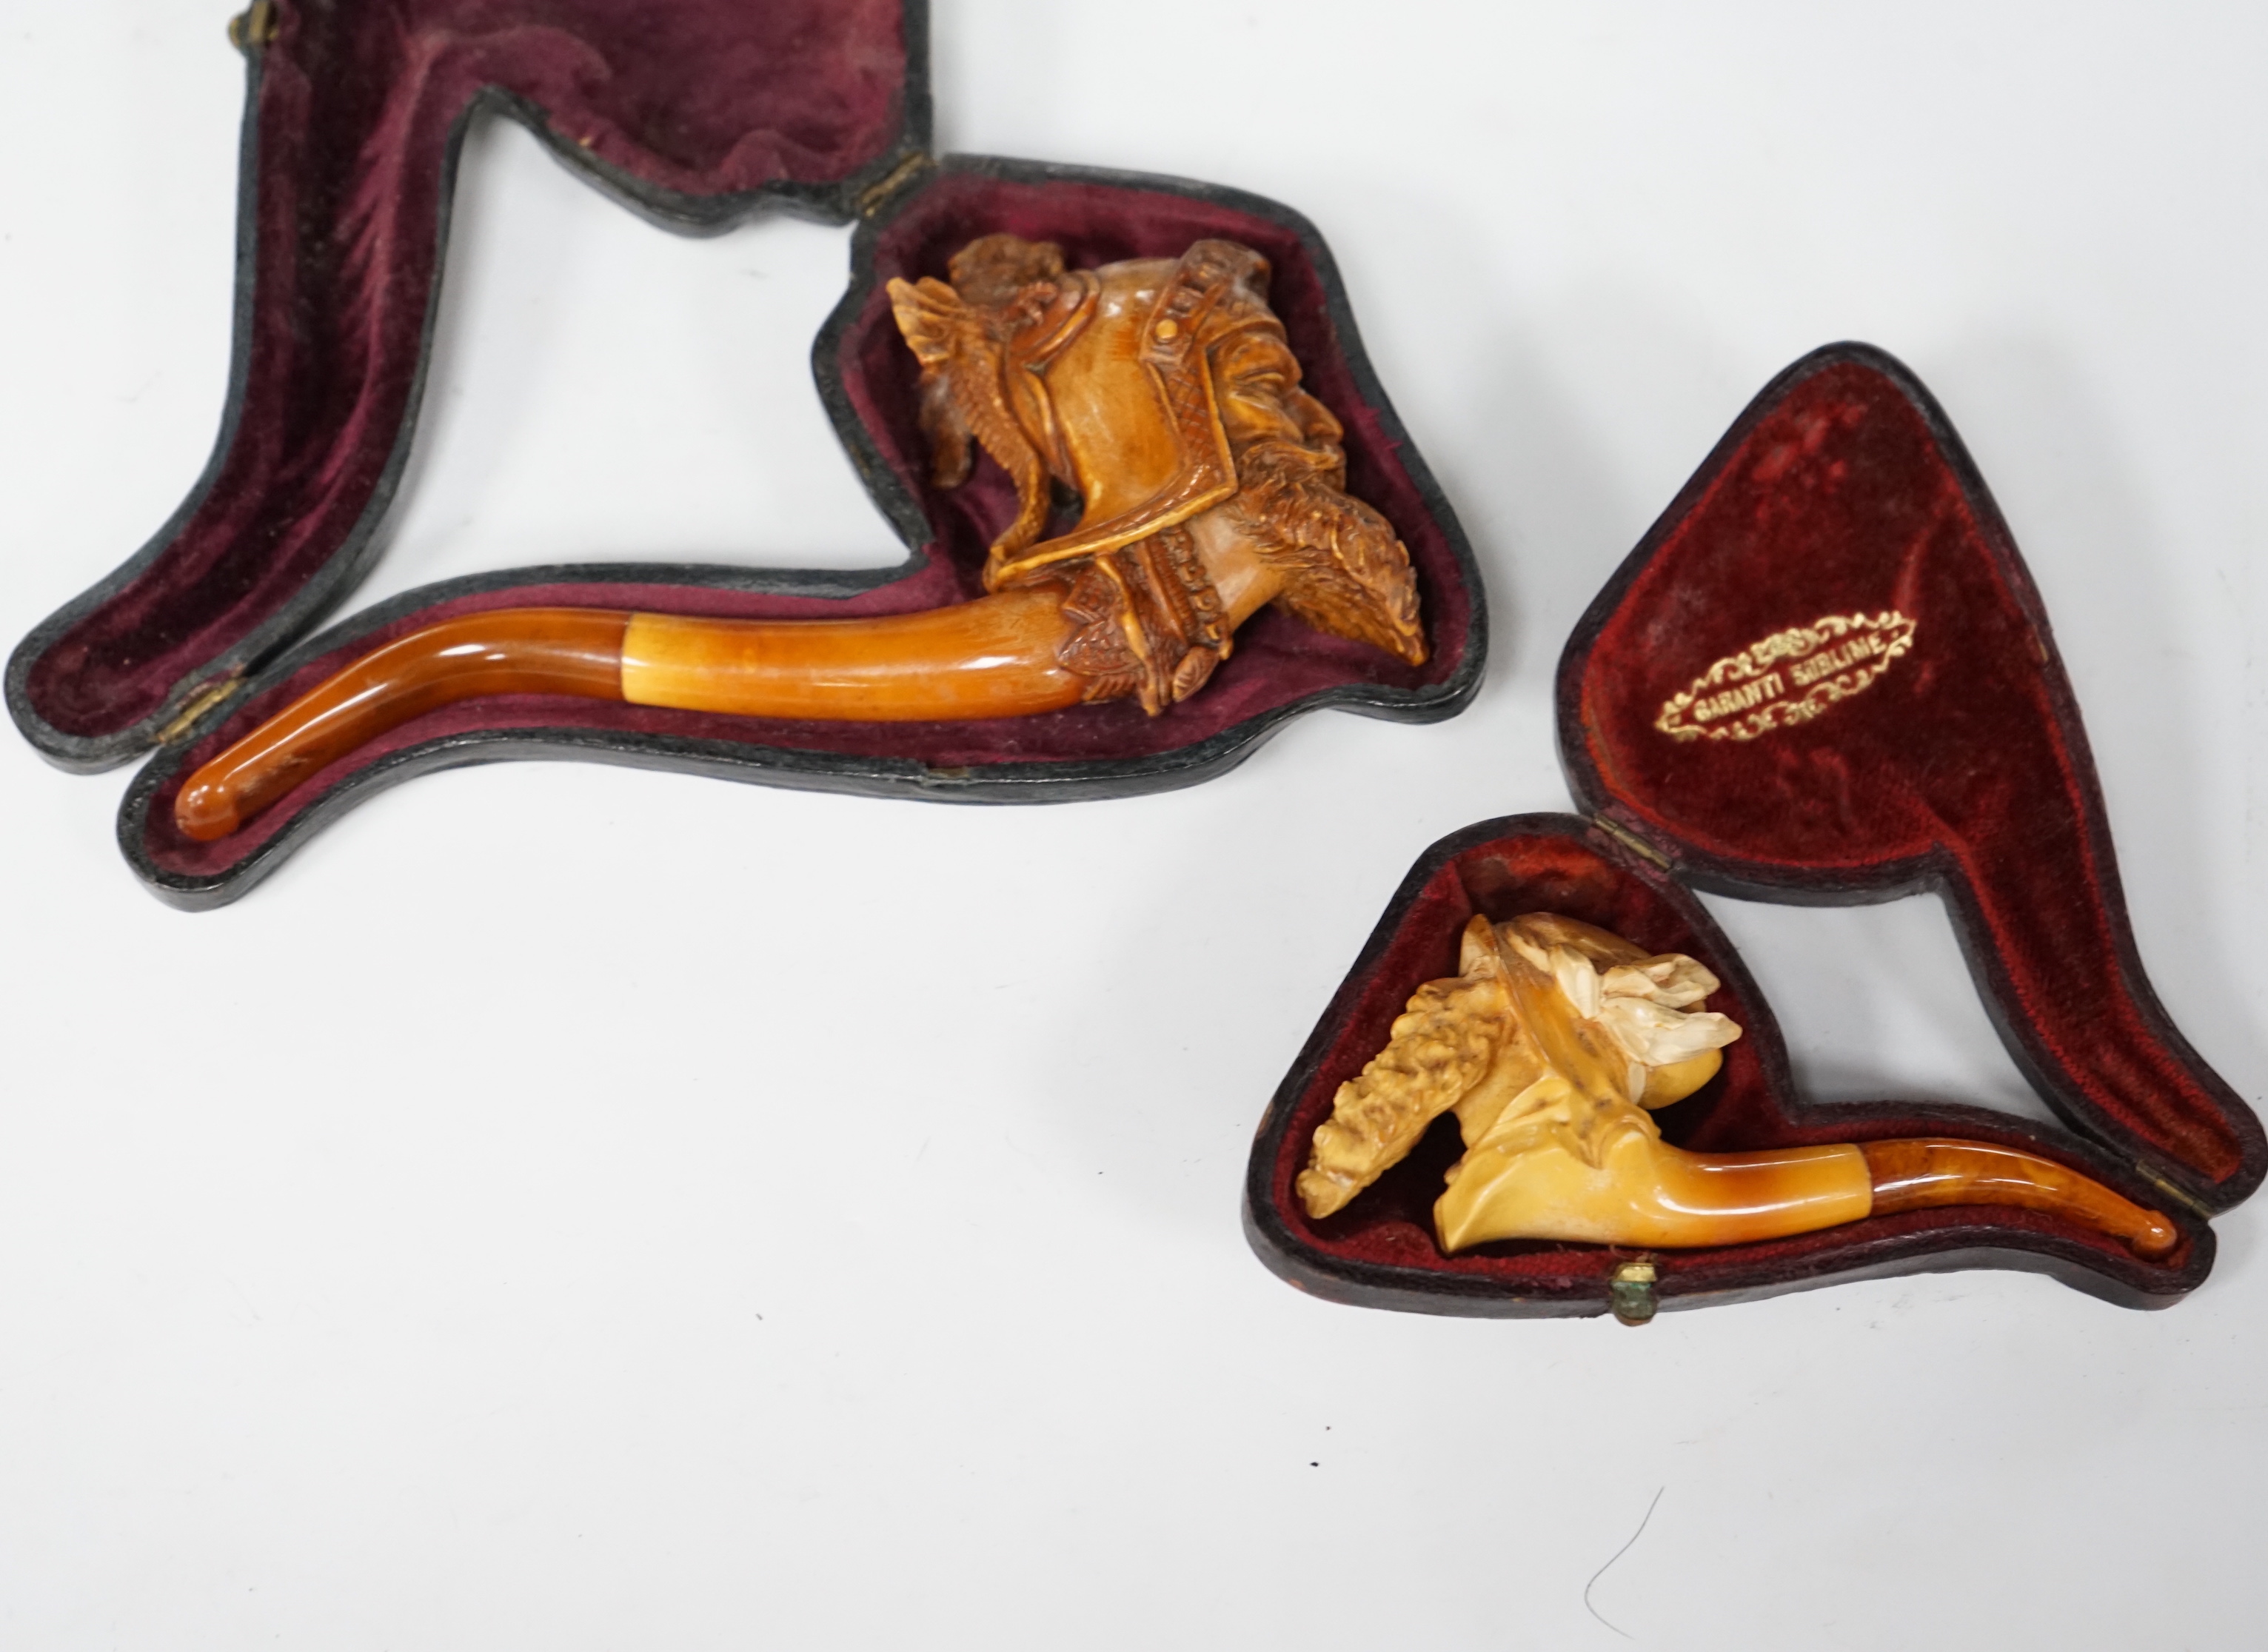 Two cased novelty Meerschaum pipes, their bowls modelled as an Arthurian knight and another a bearded man, both with amber mouthpieces, largest 16cm long                                                                   